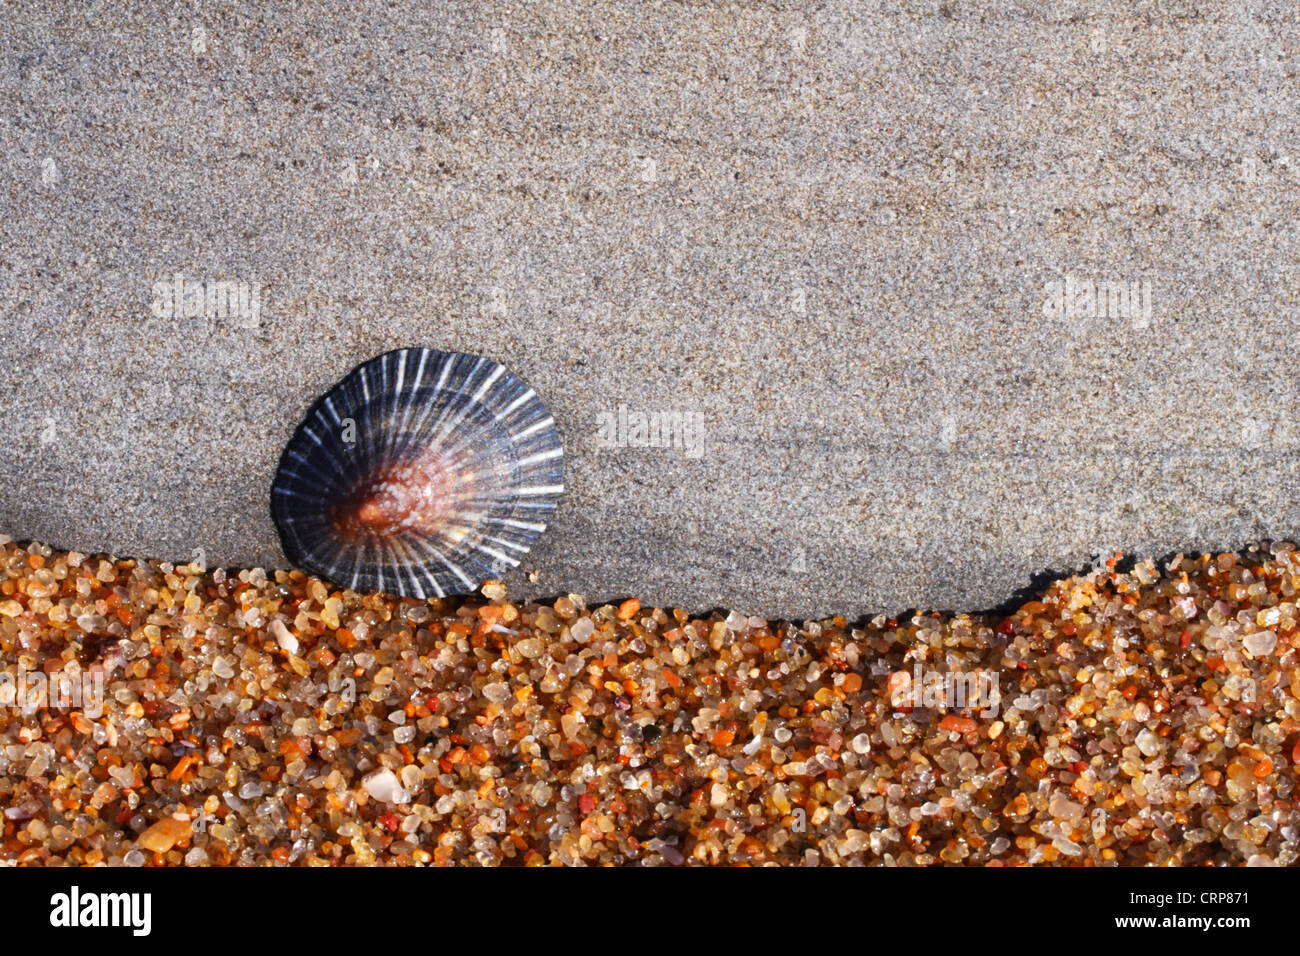 A Variable limpet (Helcion concolor) attached to rock in an intertidal zone Stock Photo